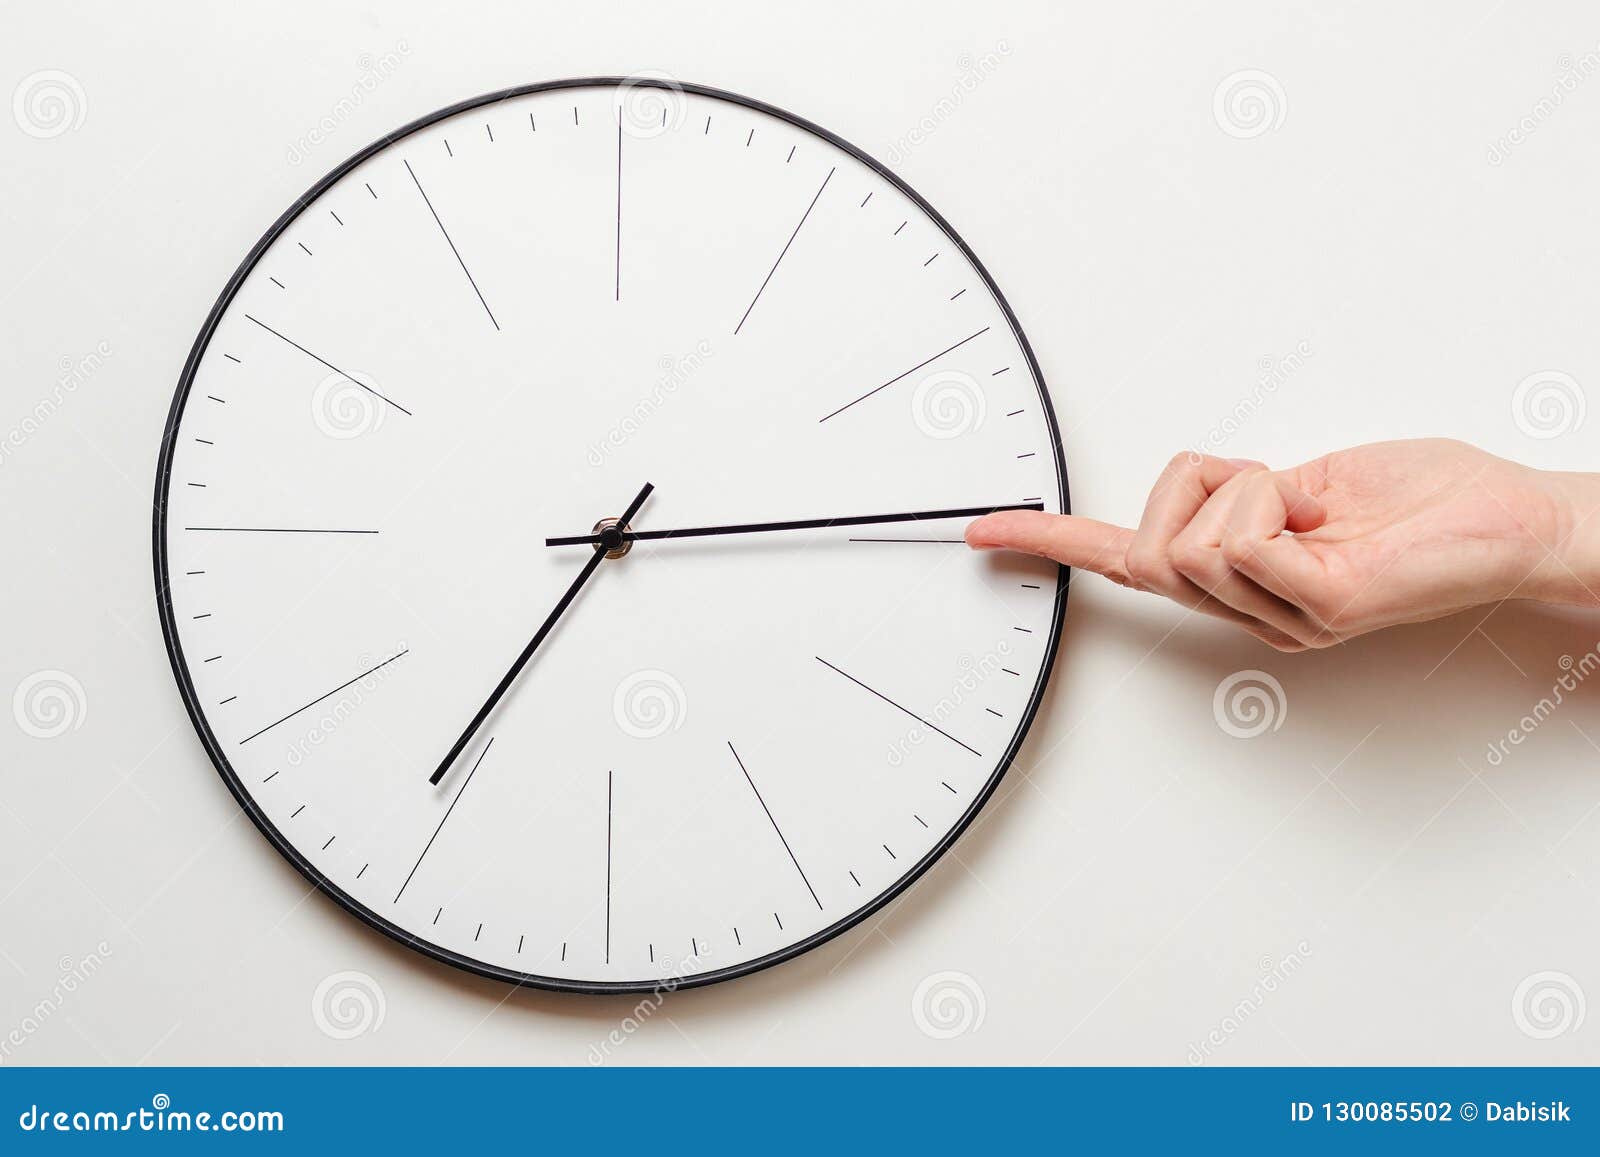 Woman hand stop time on round clock, female finger takes the minute arrow of the clock back, time management and deadline concept